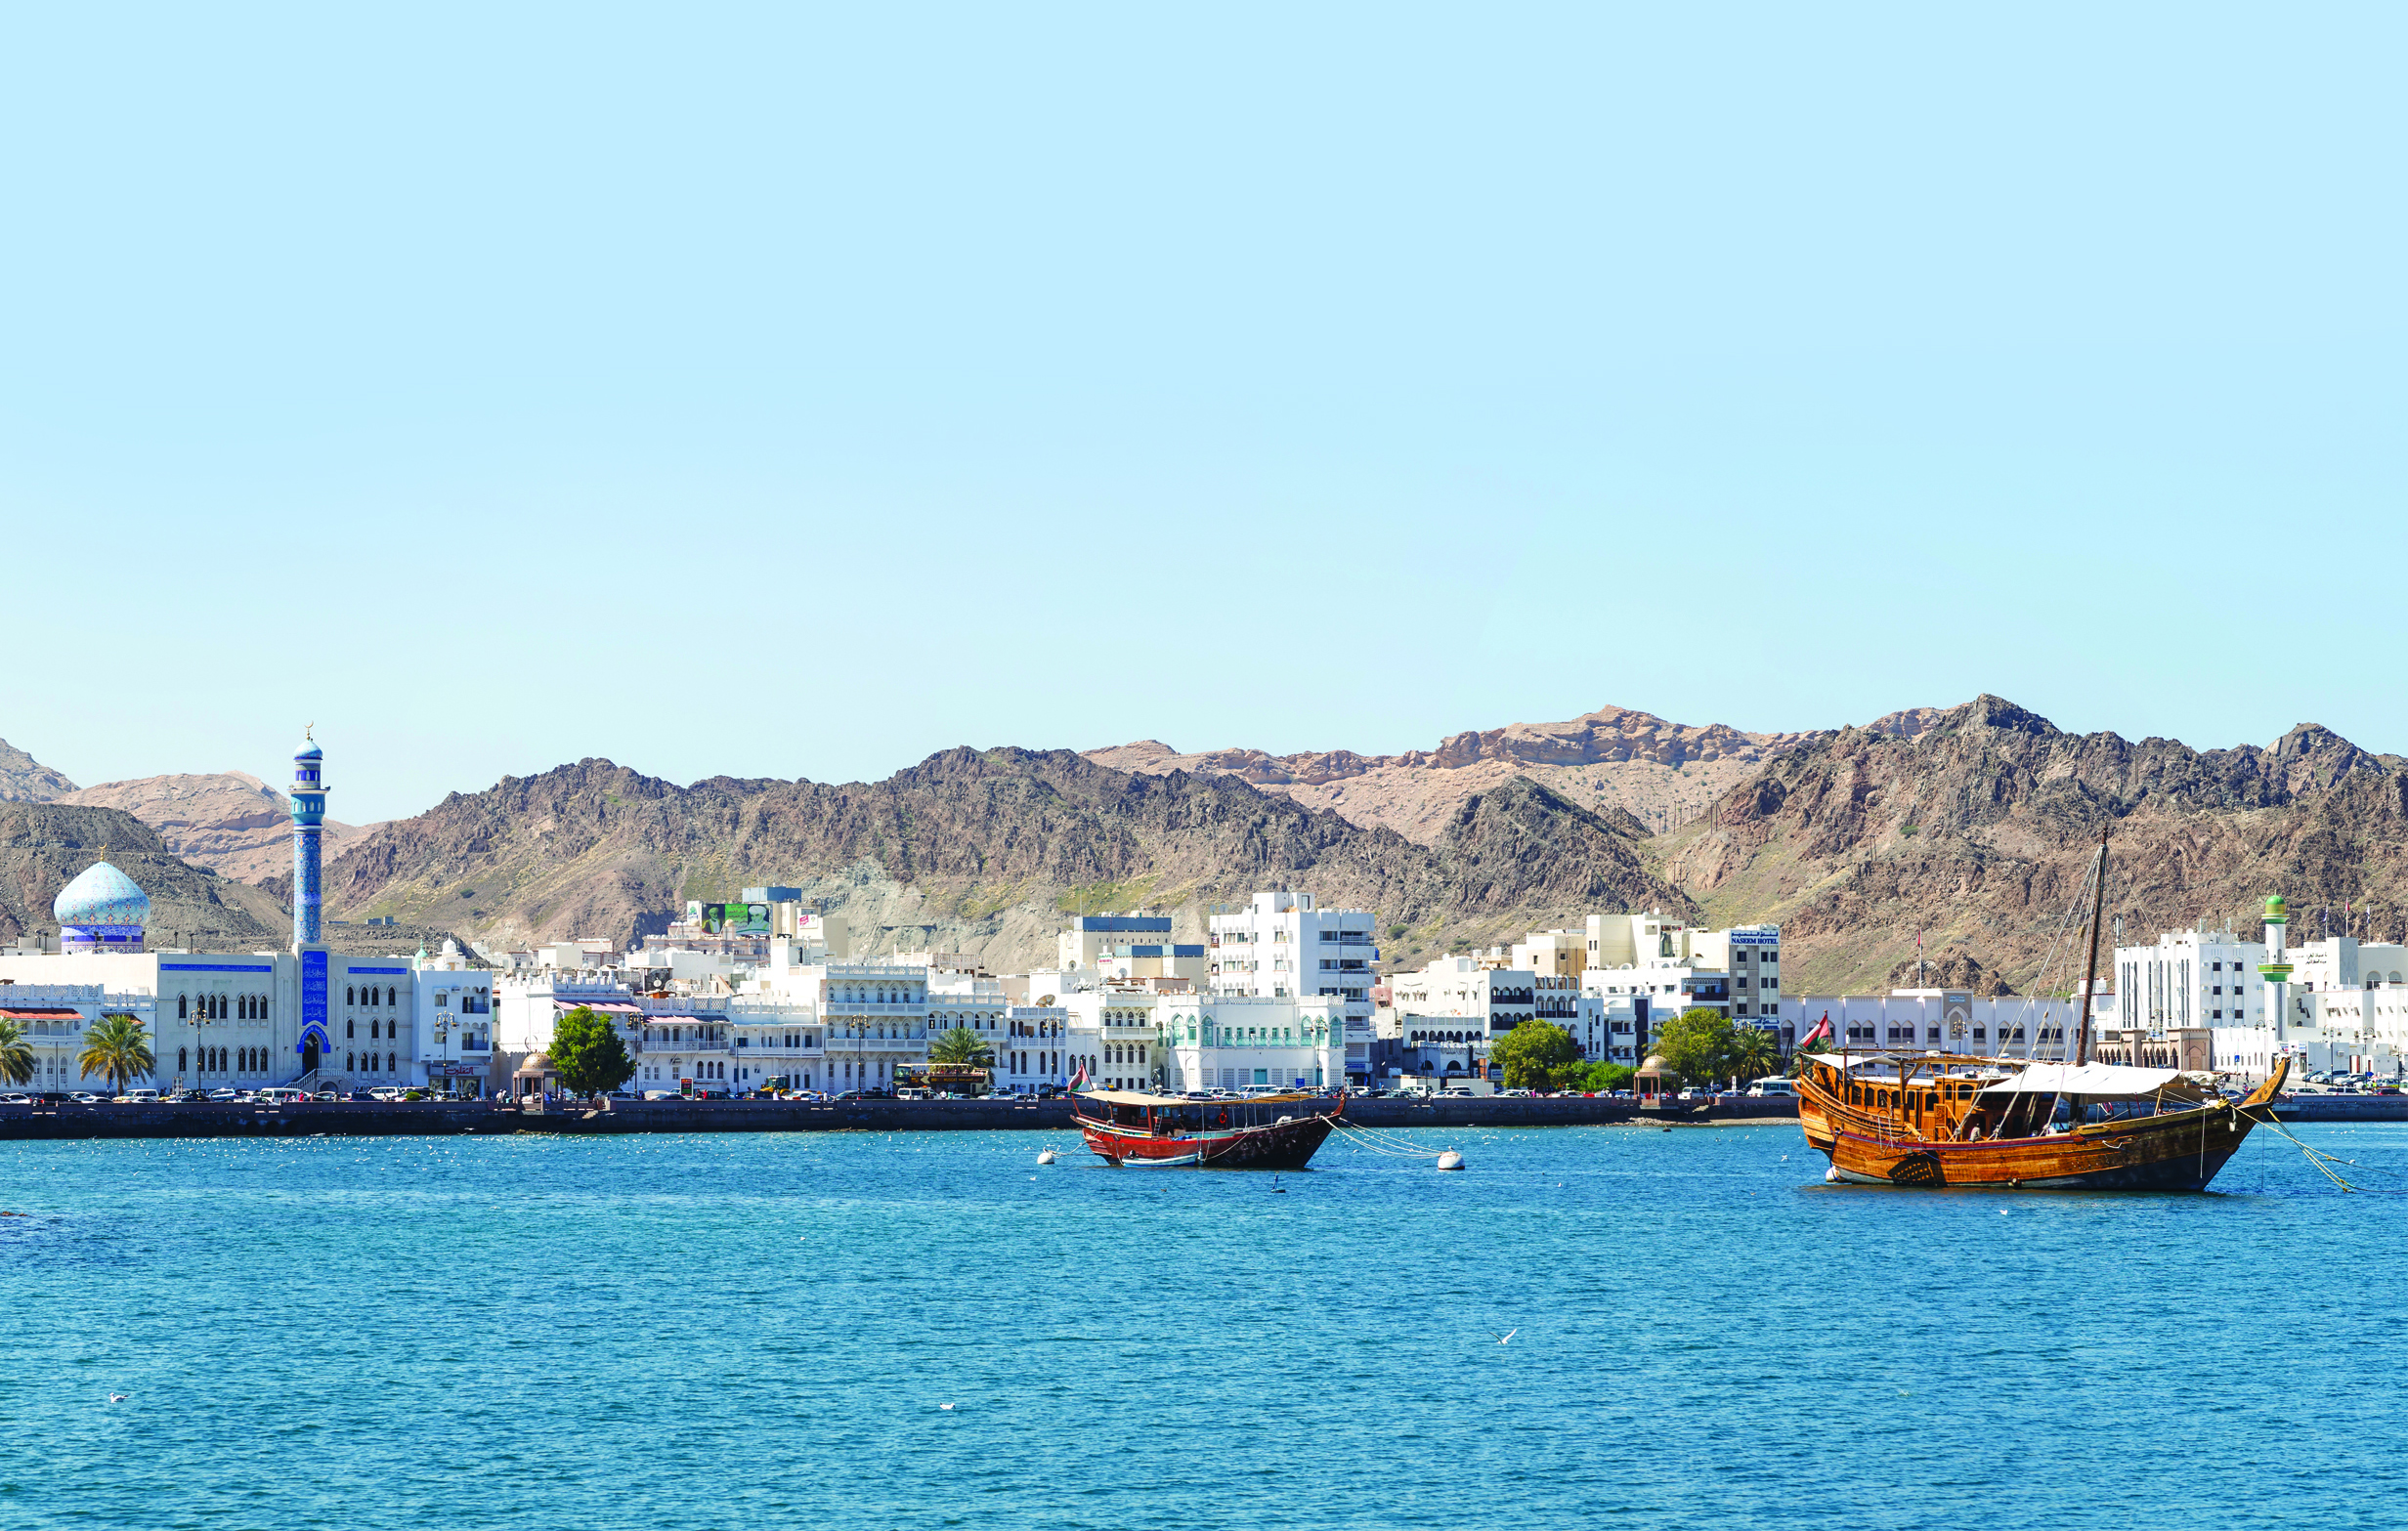 Oman culture: Historical facts you didn’t know about Muscat